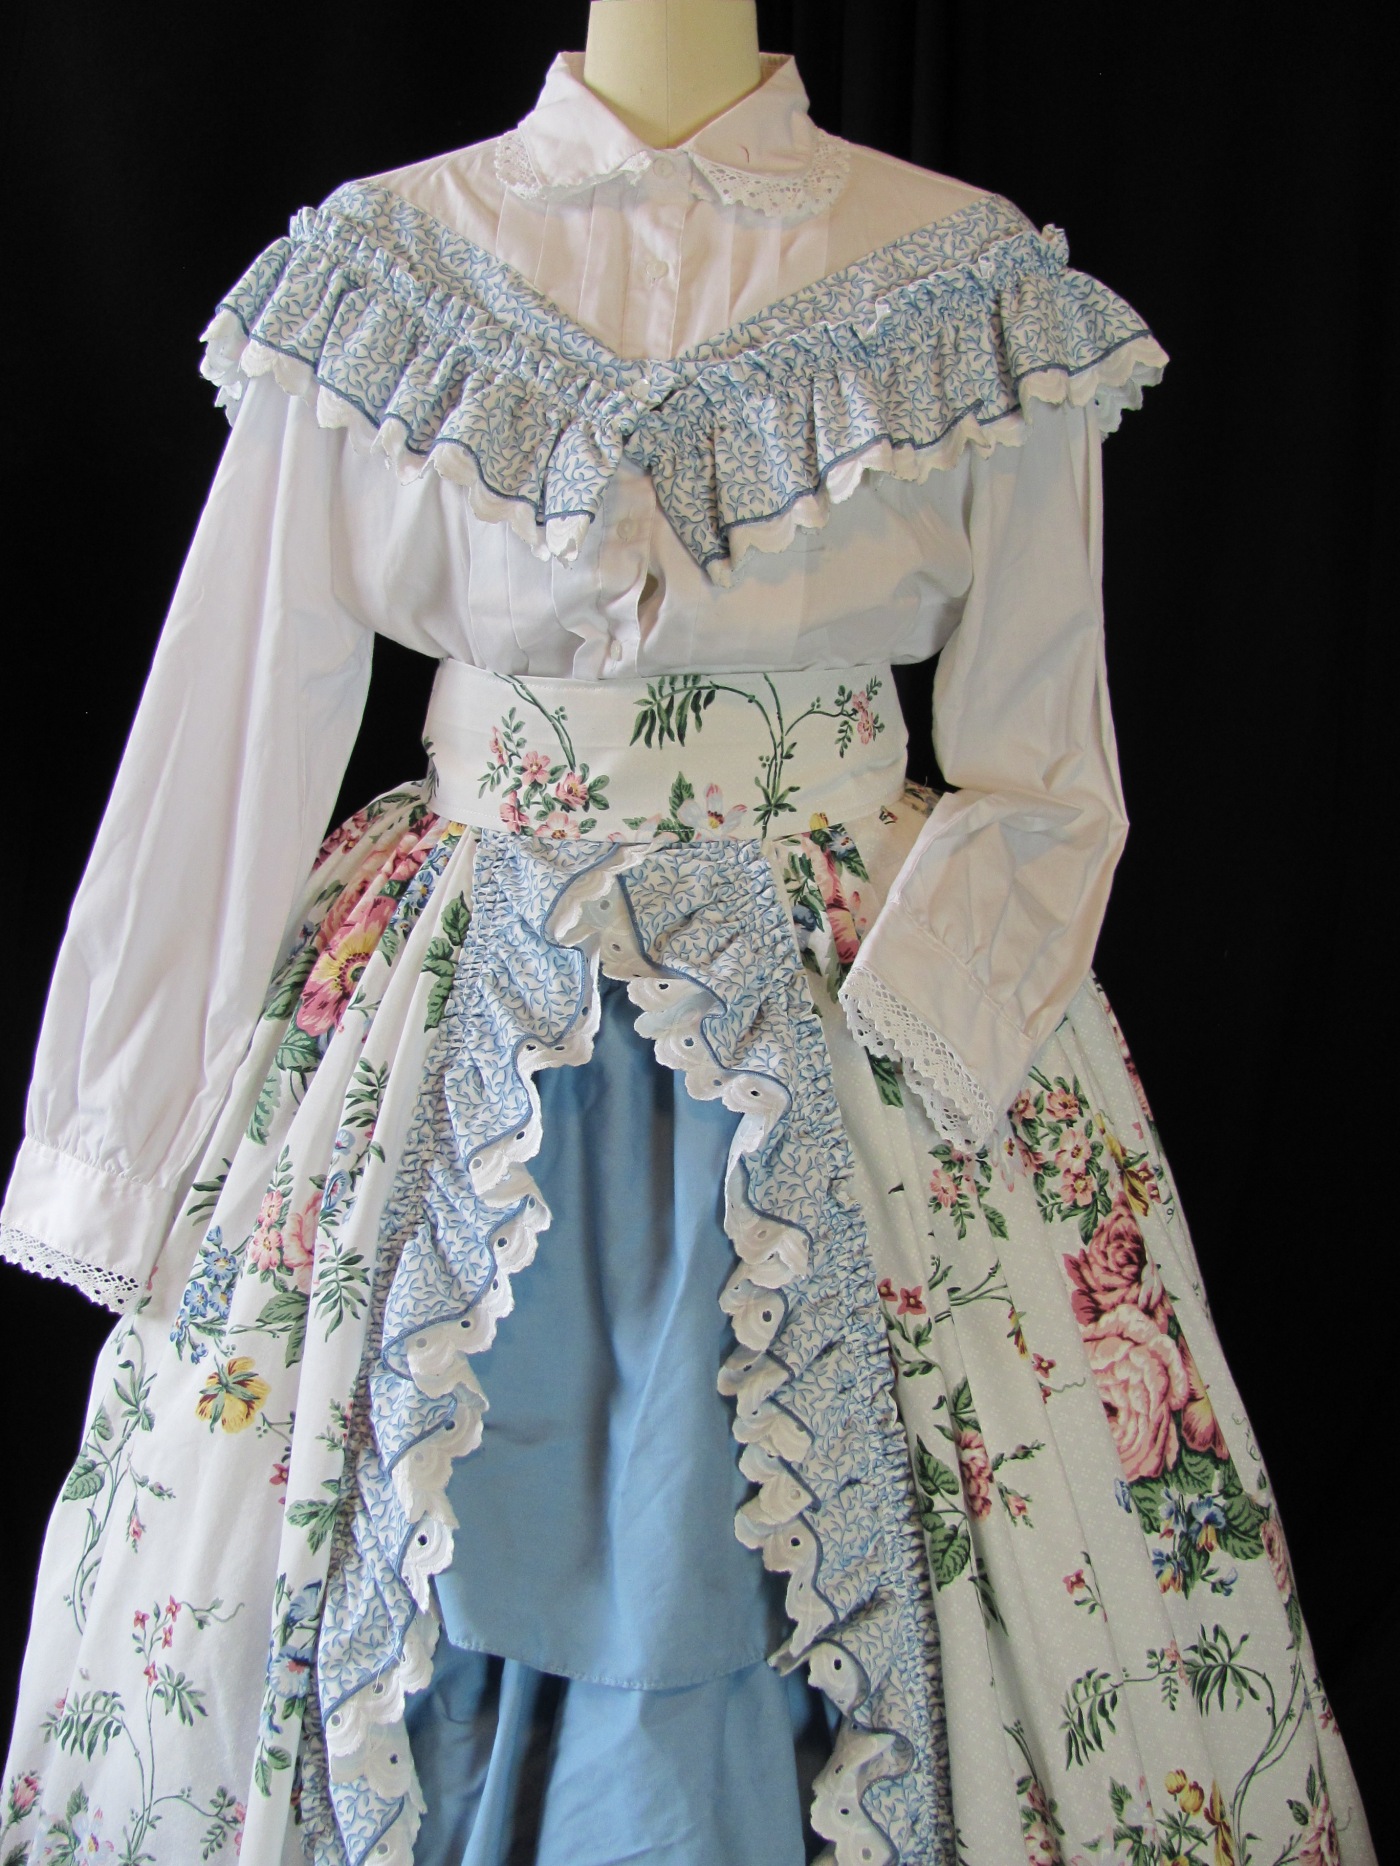 A Flowered Hoop Dress: Curtain upcycle | costumecrazed